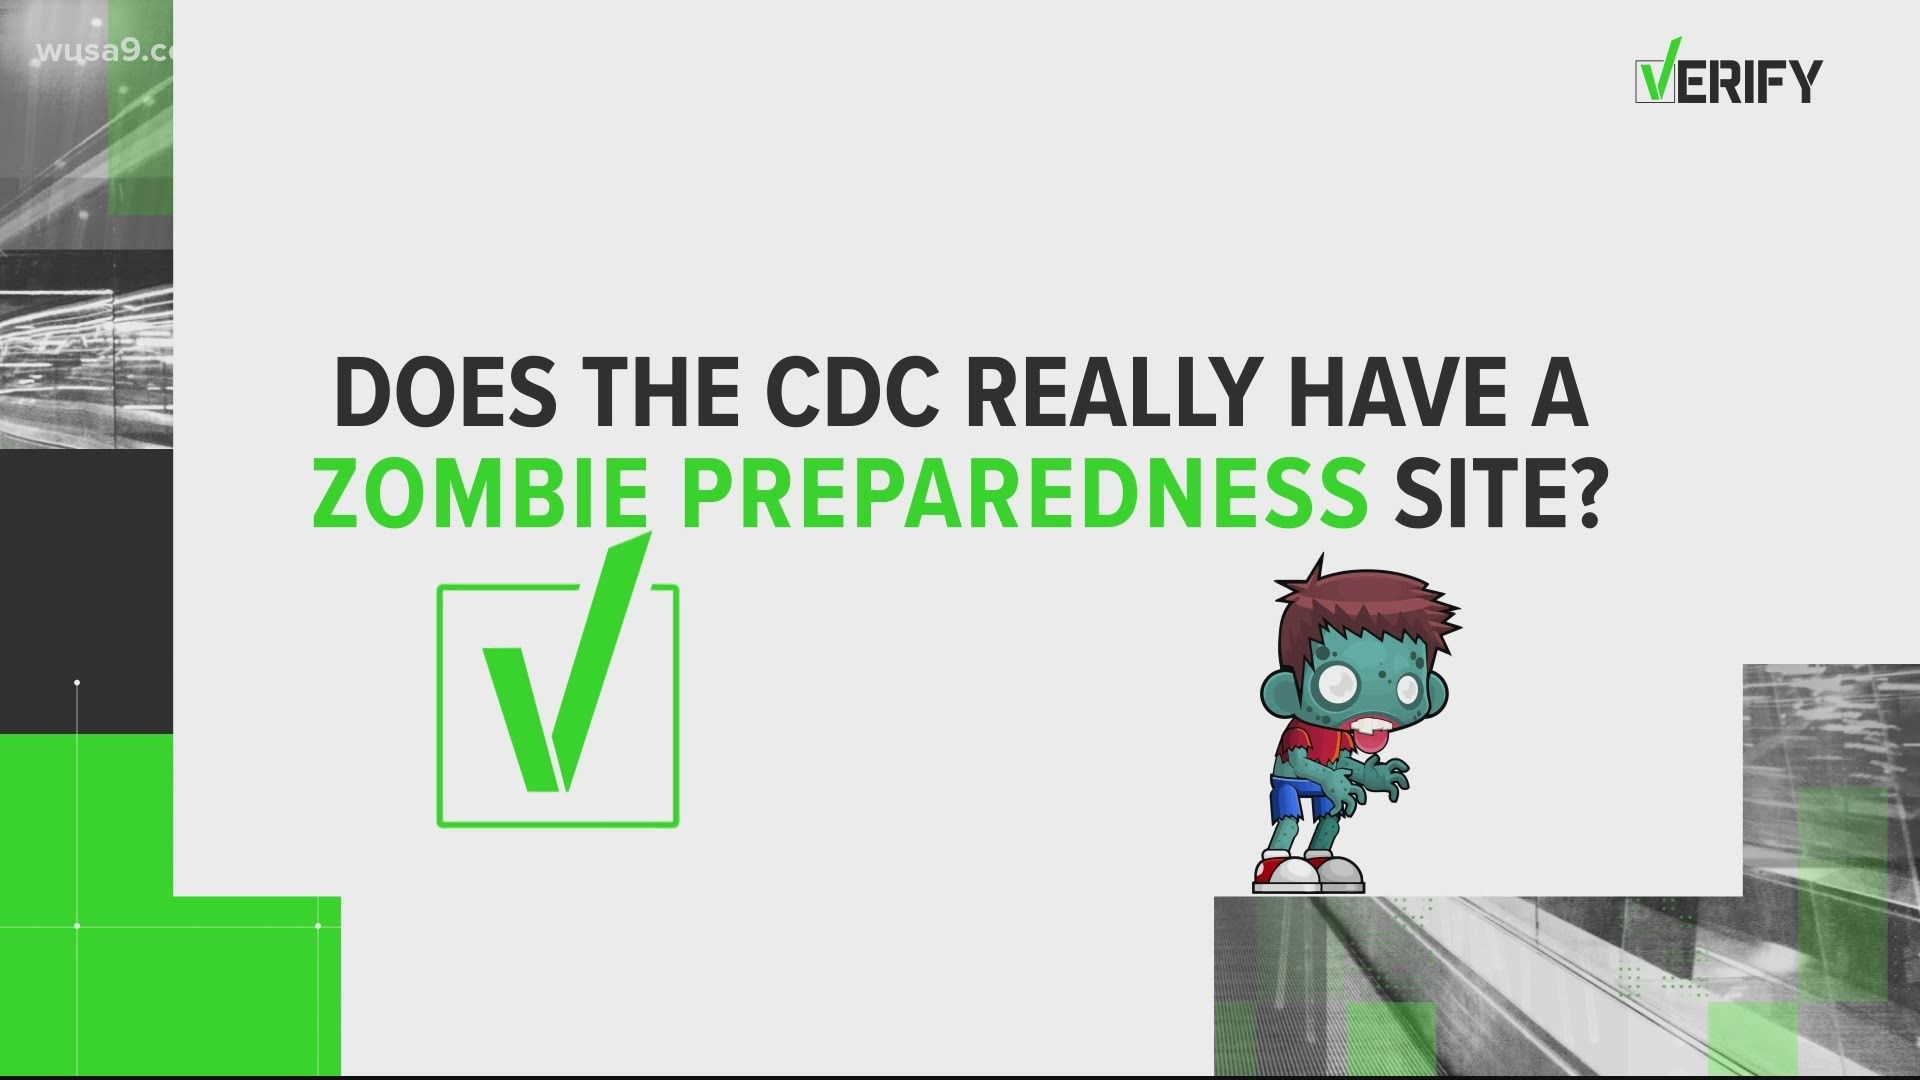 CDC zombie apocalypse 2021 warning Is it real? Latest fact check